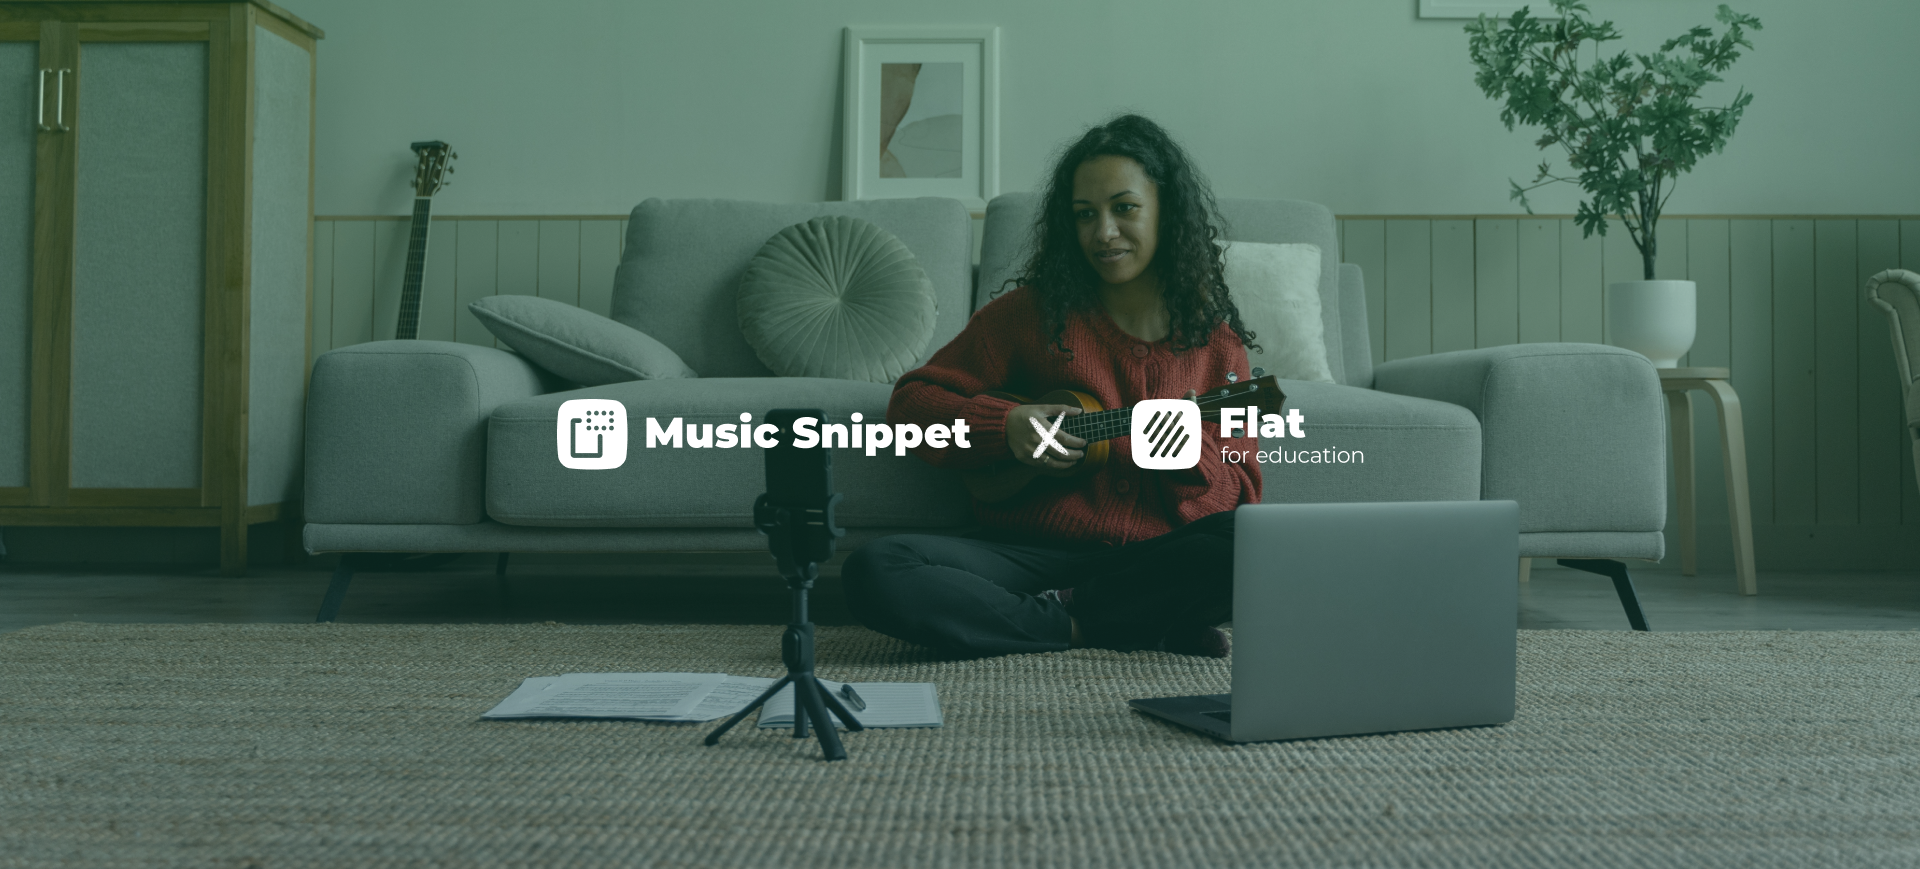 In-app: How Music Snippet and Flat for Education Work Together